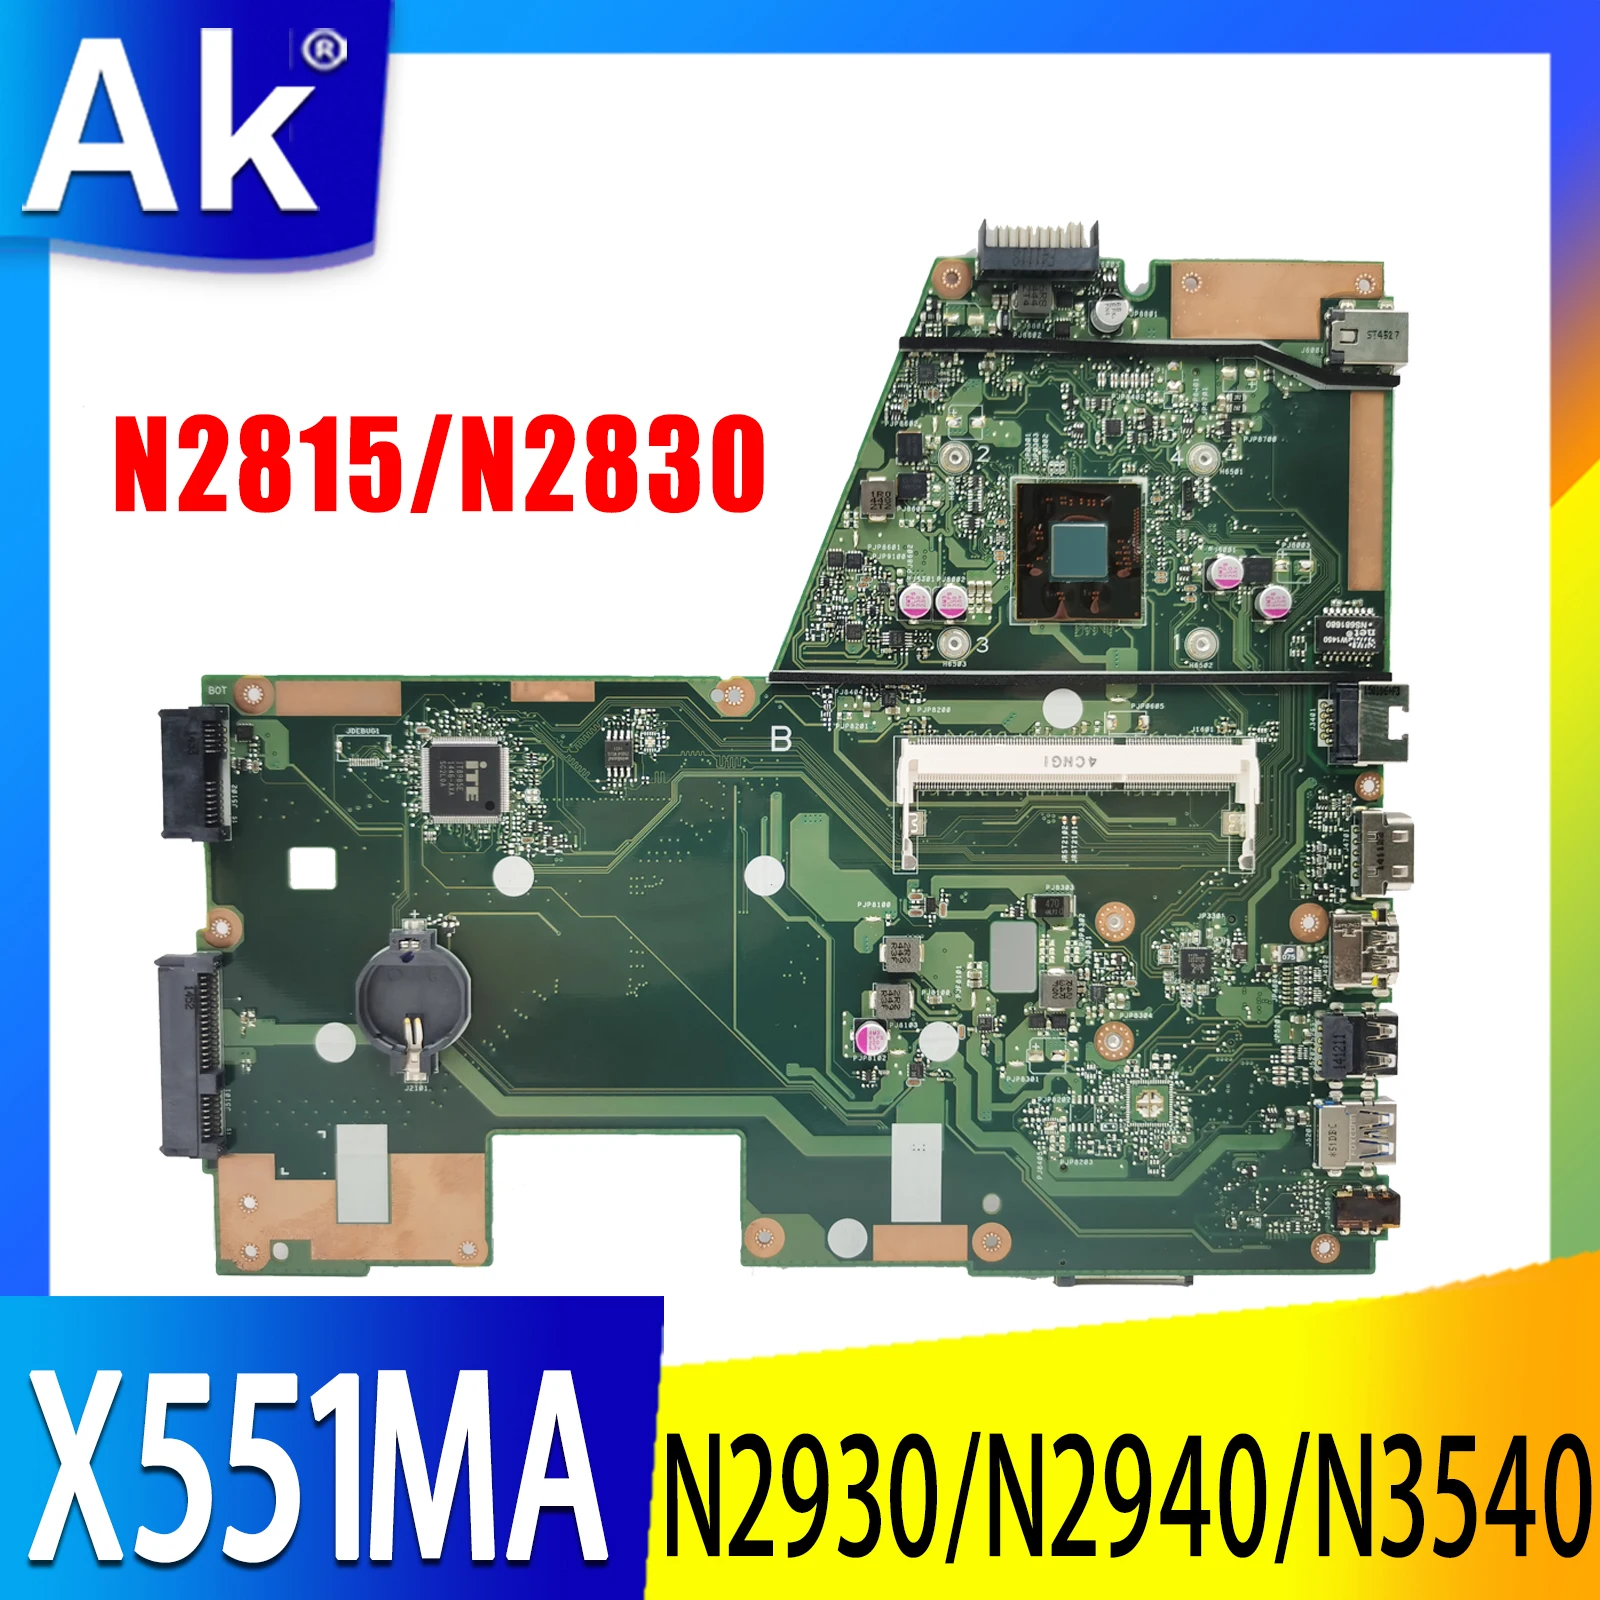 

X551MA Notebook Mainboard For ASUS X551MA F551MA D550M Motherboard With N2930 N2840 N3530 N3540 CPU 100% Fully Tested